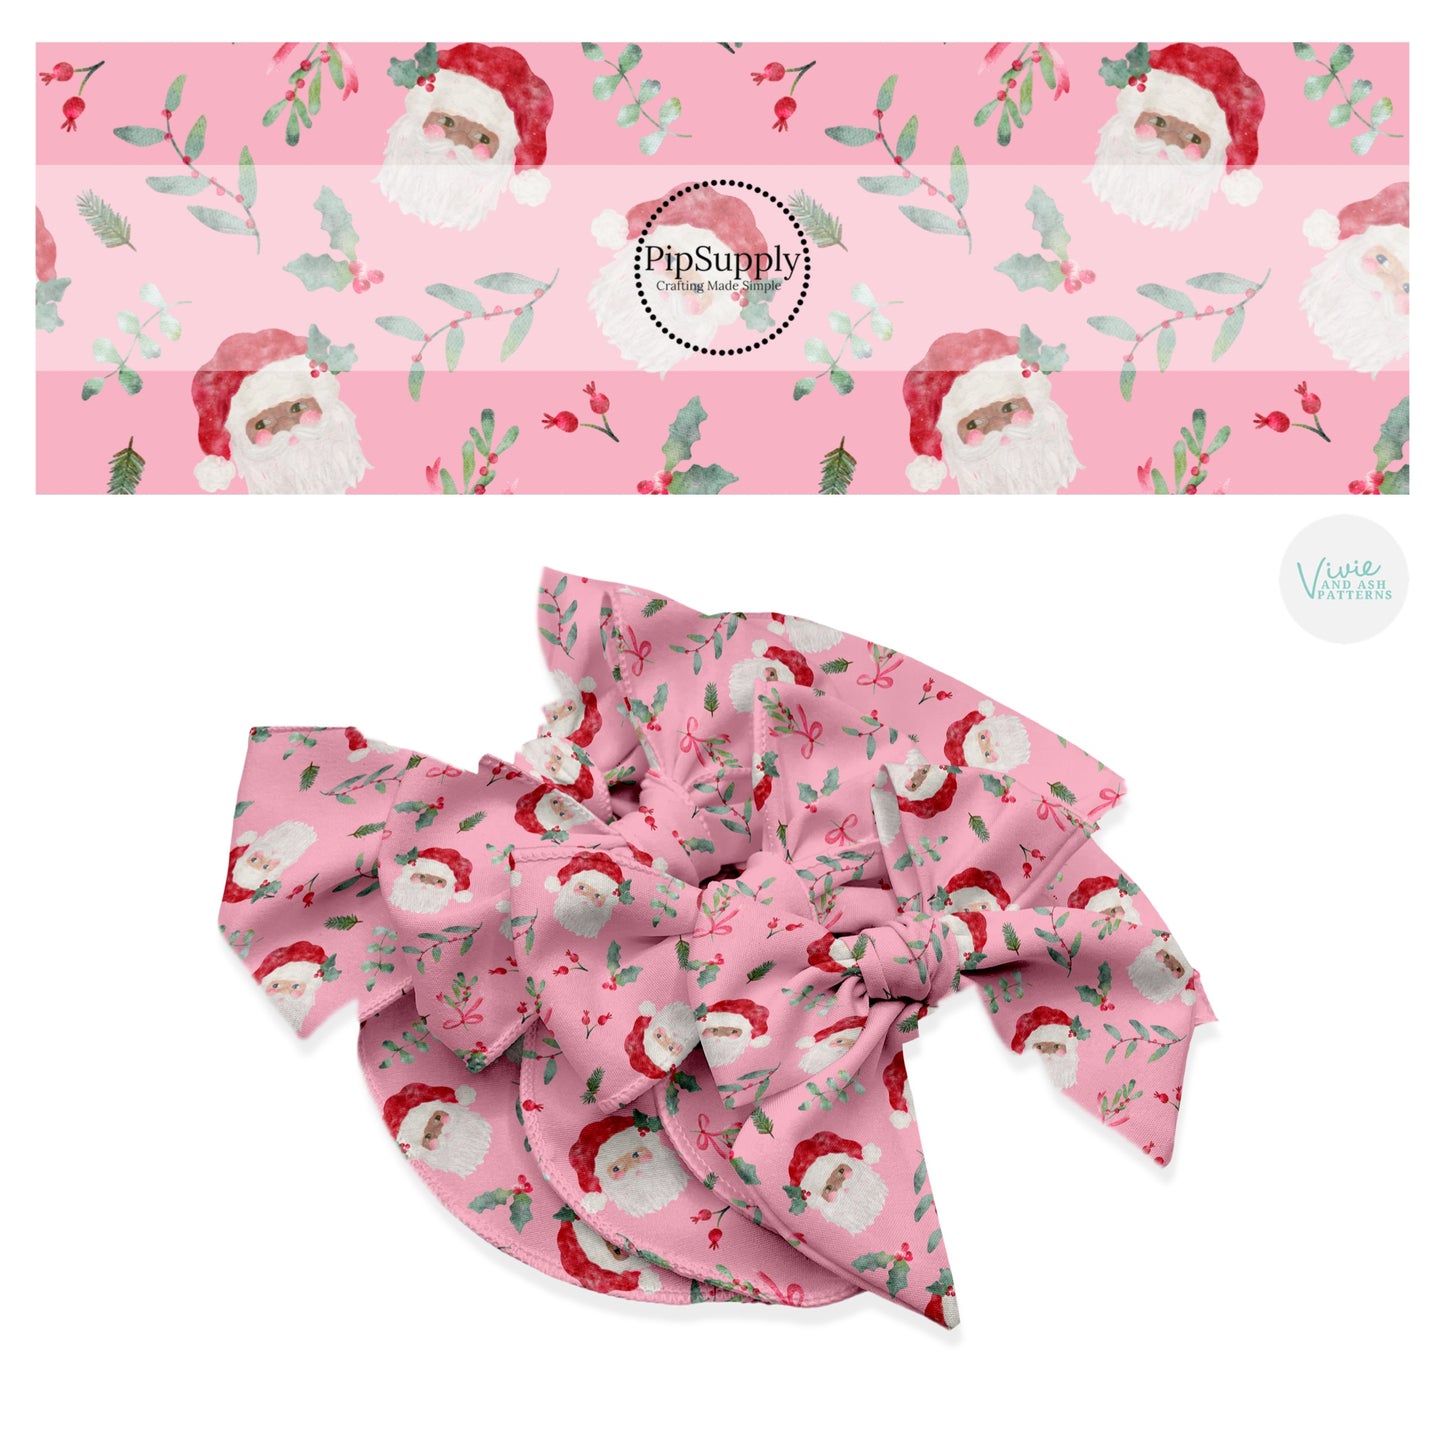 Santa claus and holly on pink hair bow strips